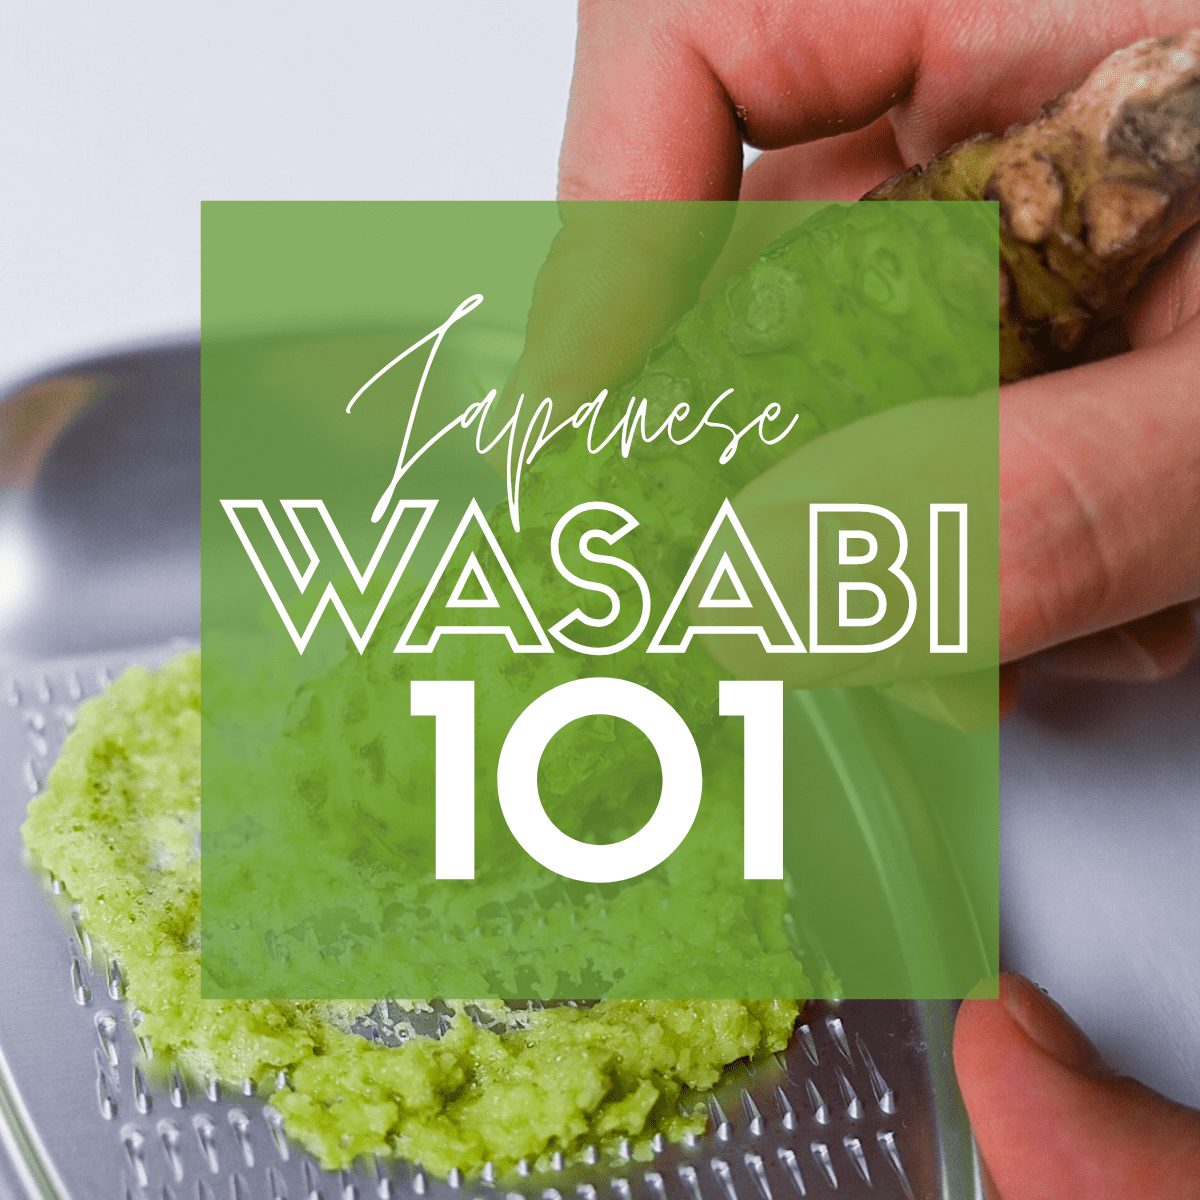 Wasabi 101 - wasabi root being grated on silver Japanese grater